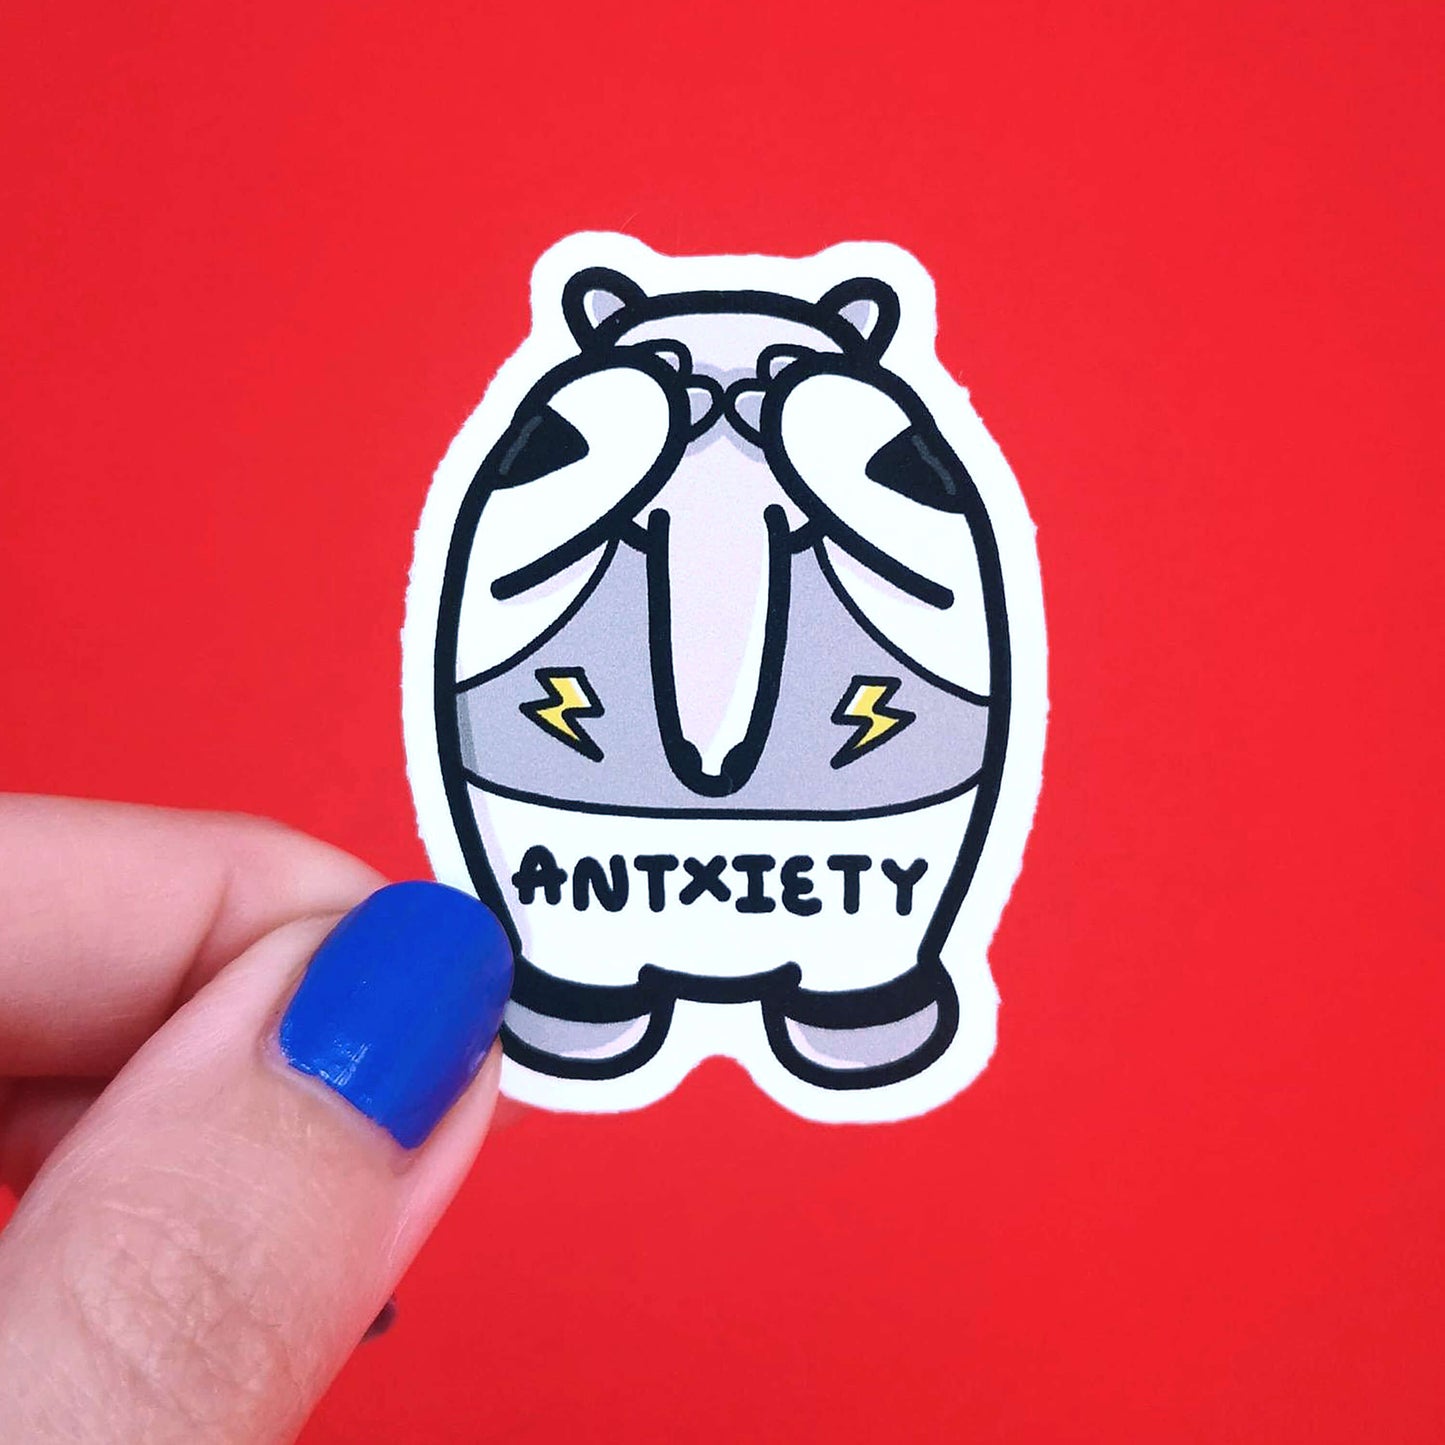 Antxiety Sticker Anxiety being held over a red background. Sticker is a grey and white anteater with yellow lightning bolts and the word antxiety across its belly. The sticker is designed to raise awareness for anxiety disorders and anxious emotions.